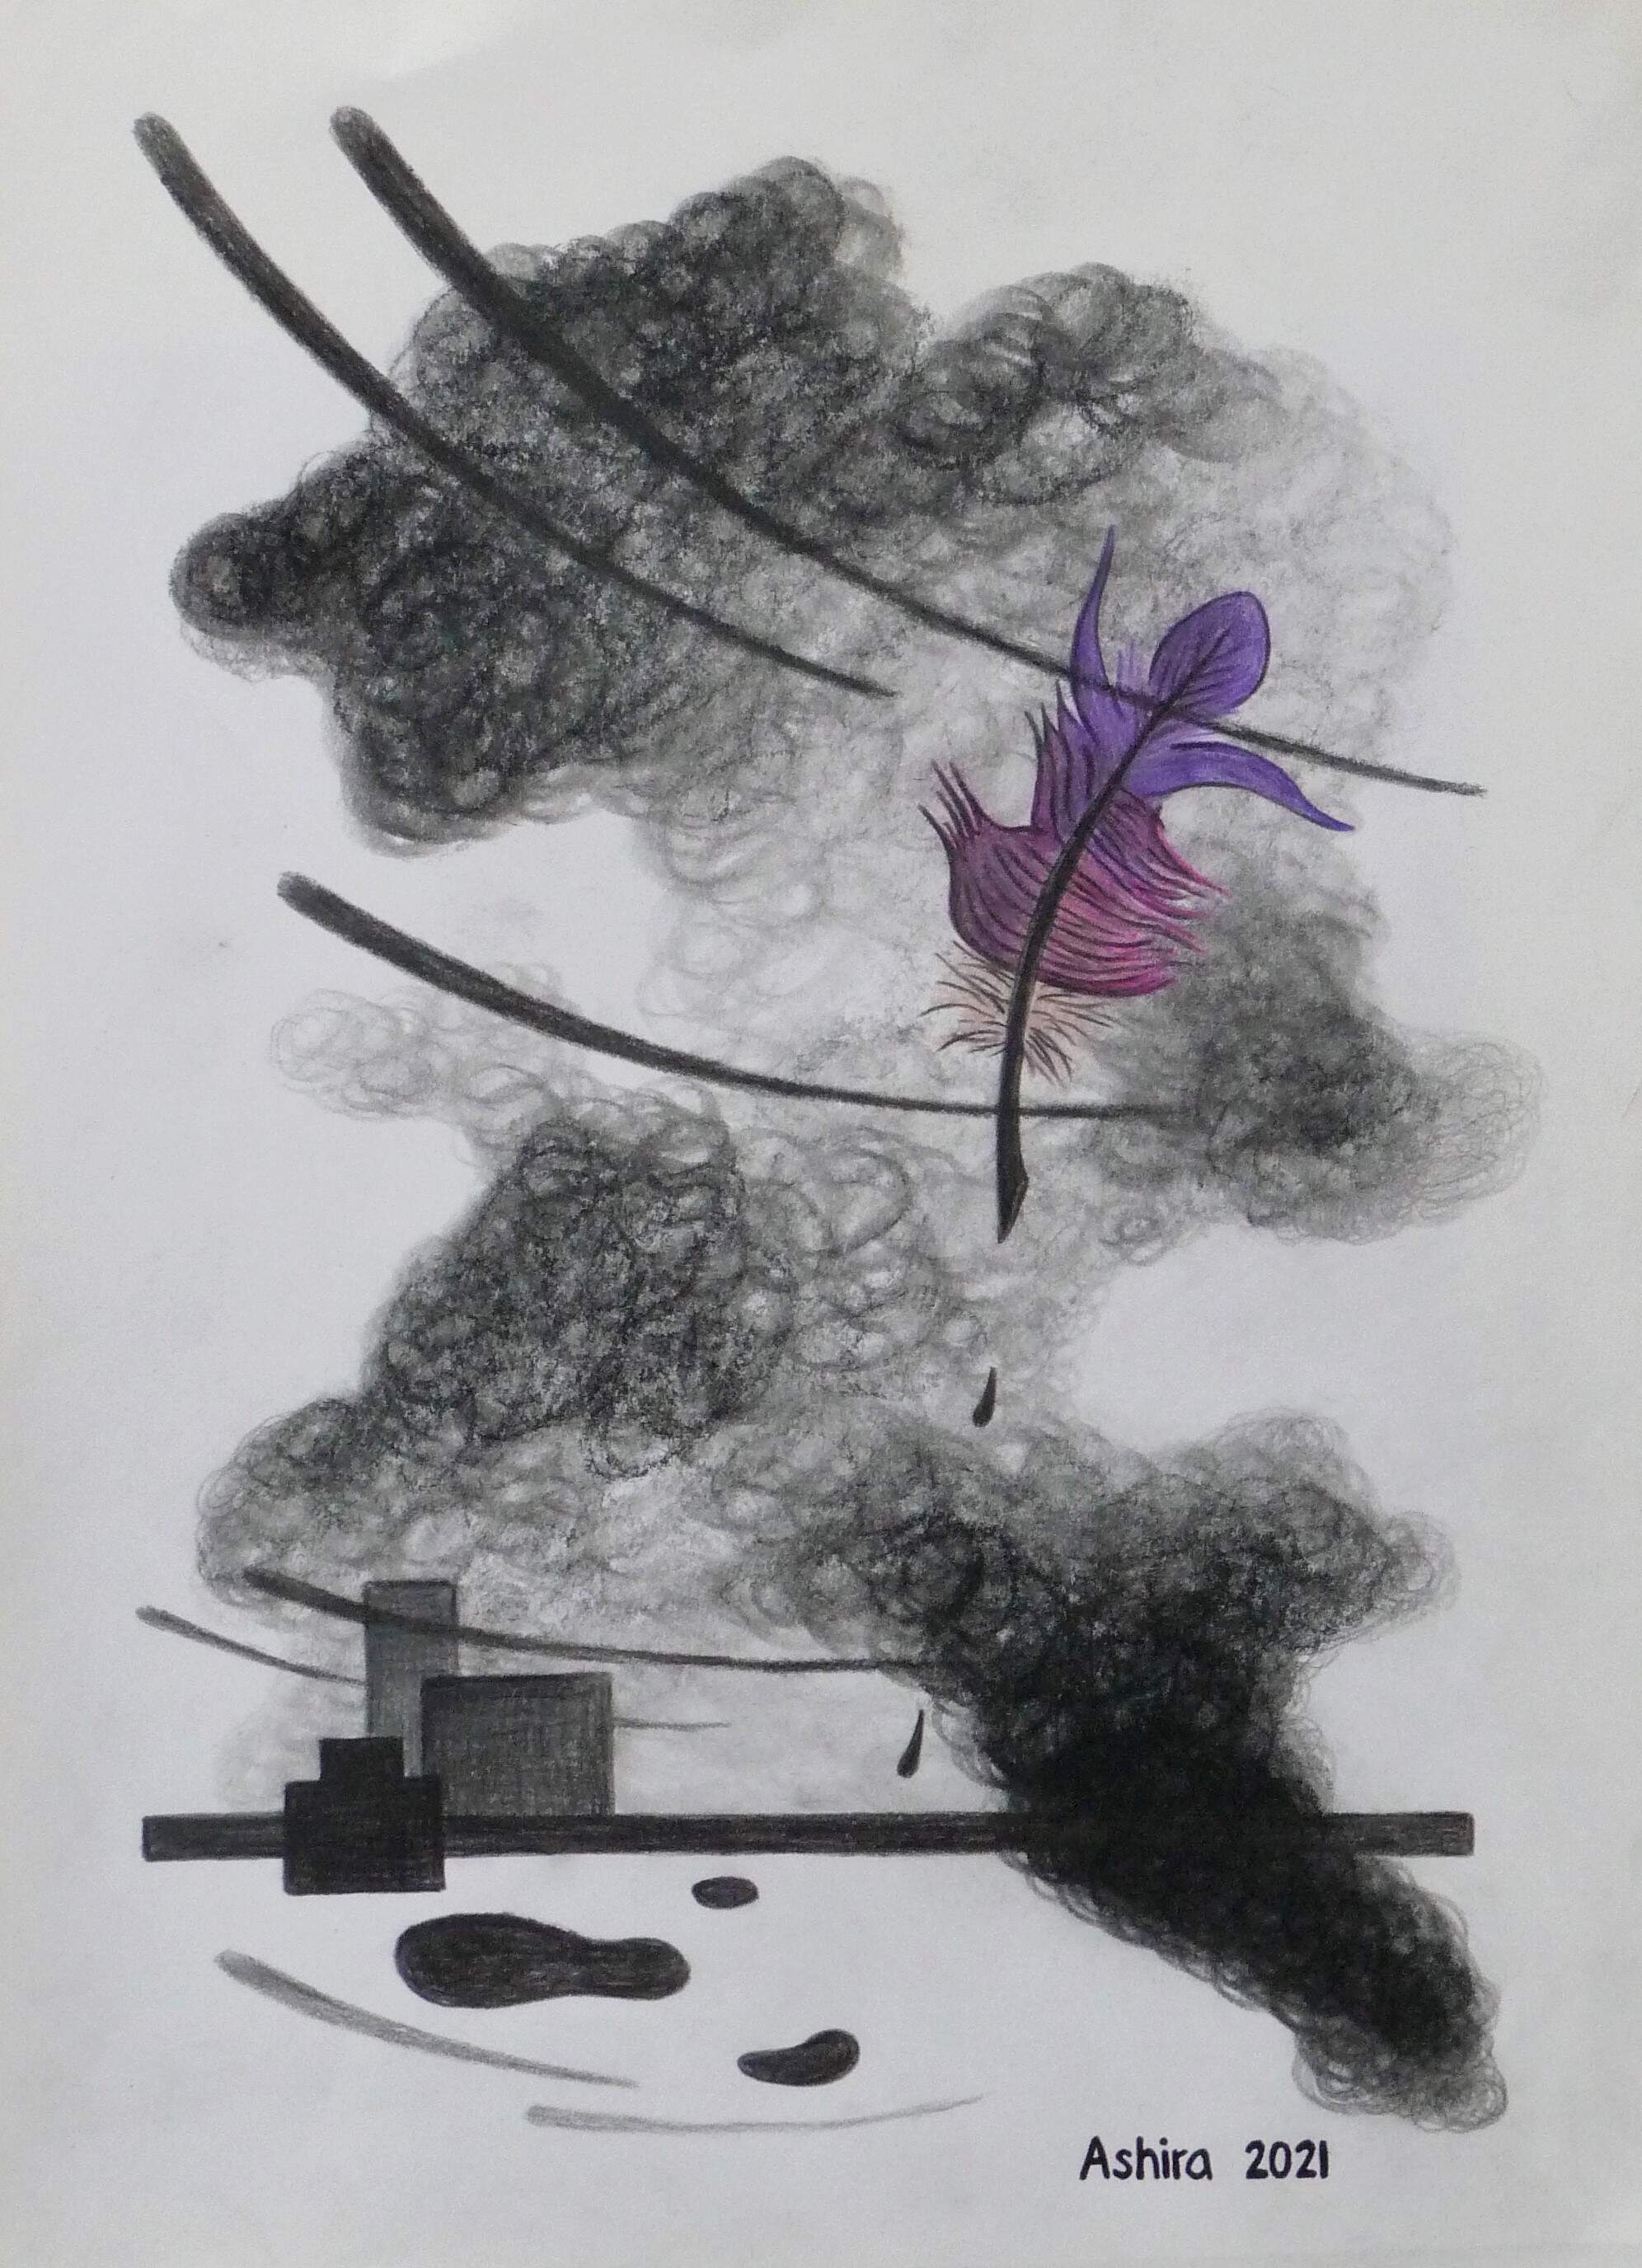 quill - nov 27th 2021, graphite and pencil on paper, 28x36 cm